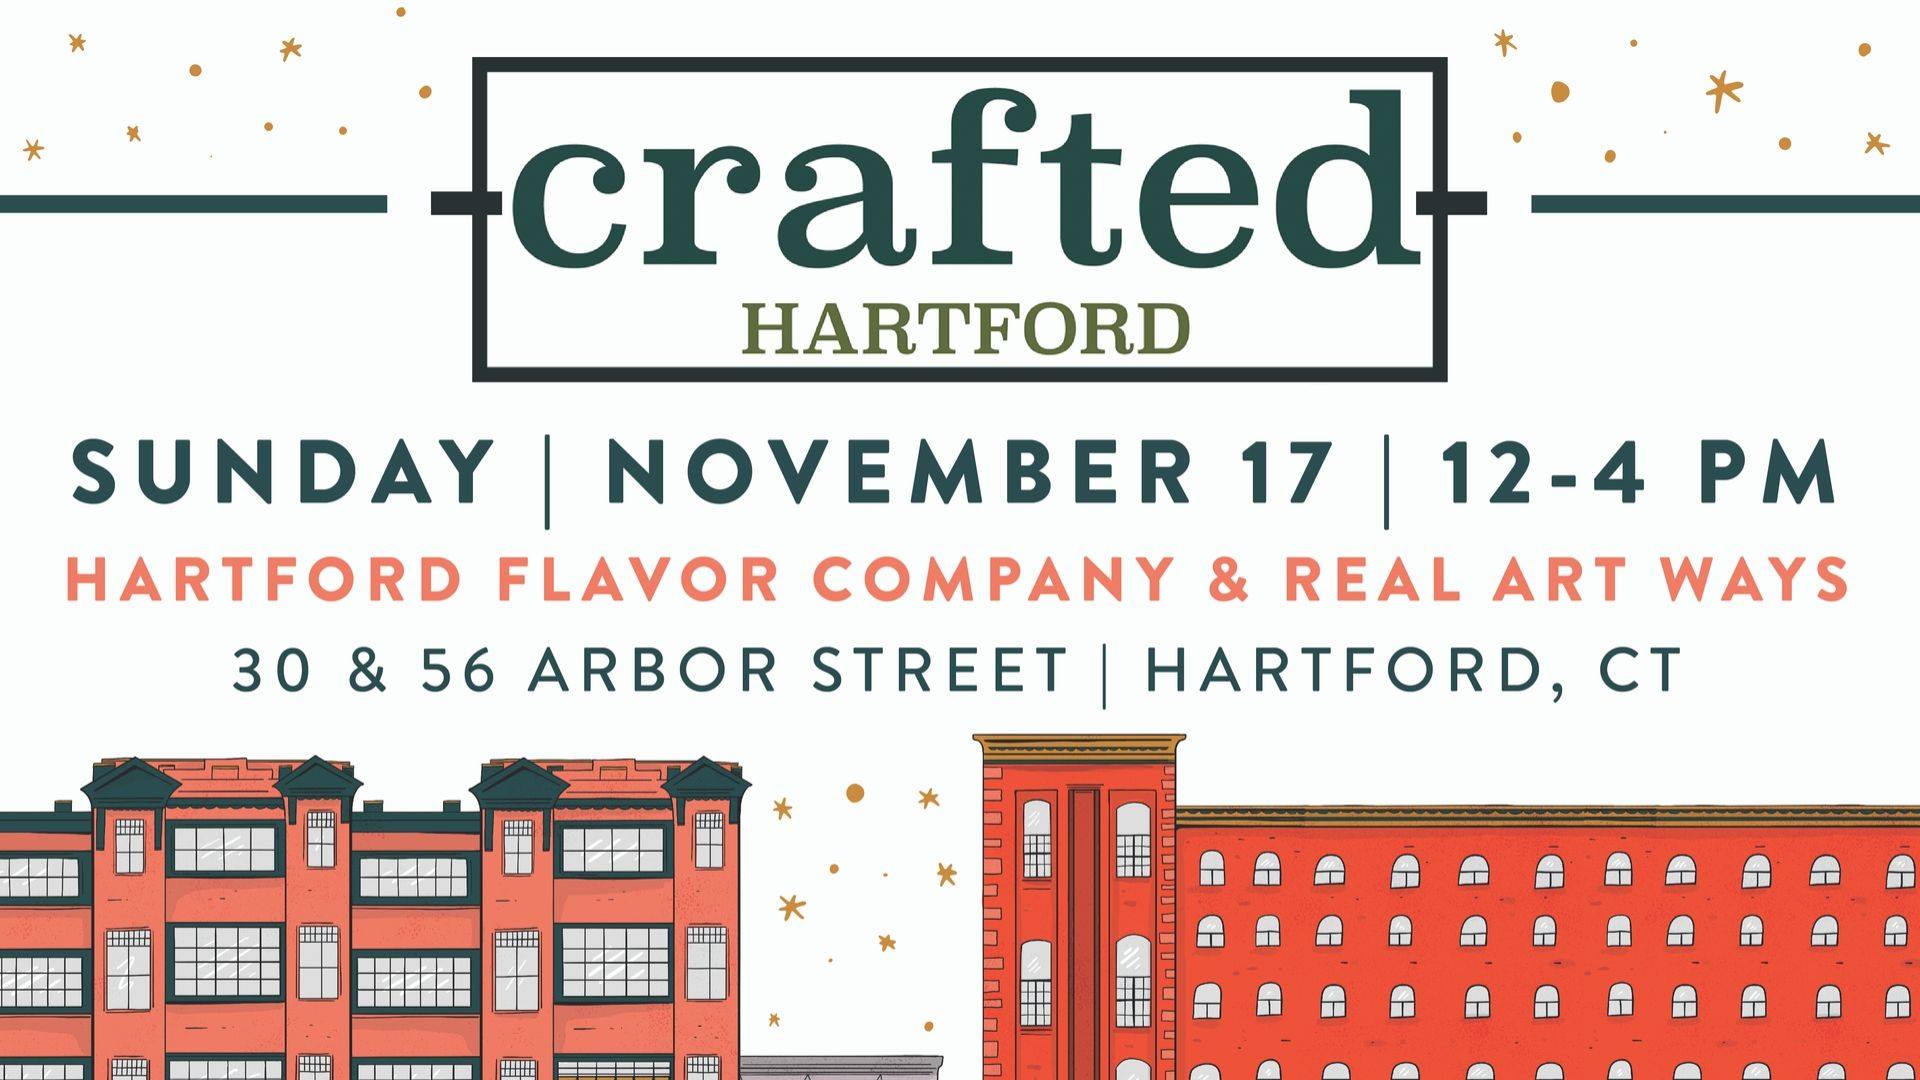 Back by popular demand, CRAFTED HARTFORD is coming to the Hartford Flavor Company and Real At Ways, Sunday, November 17!